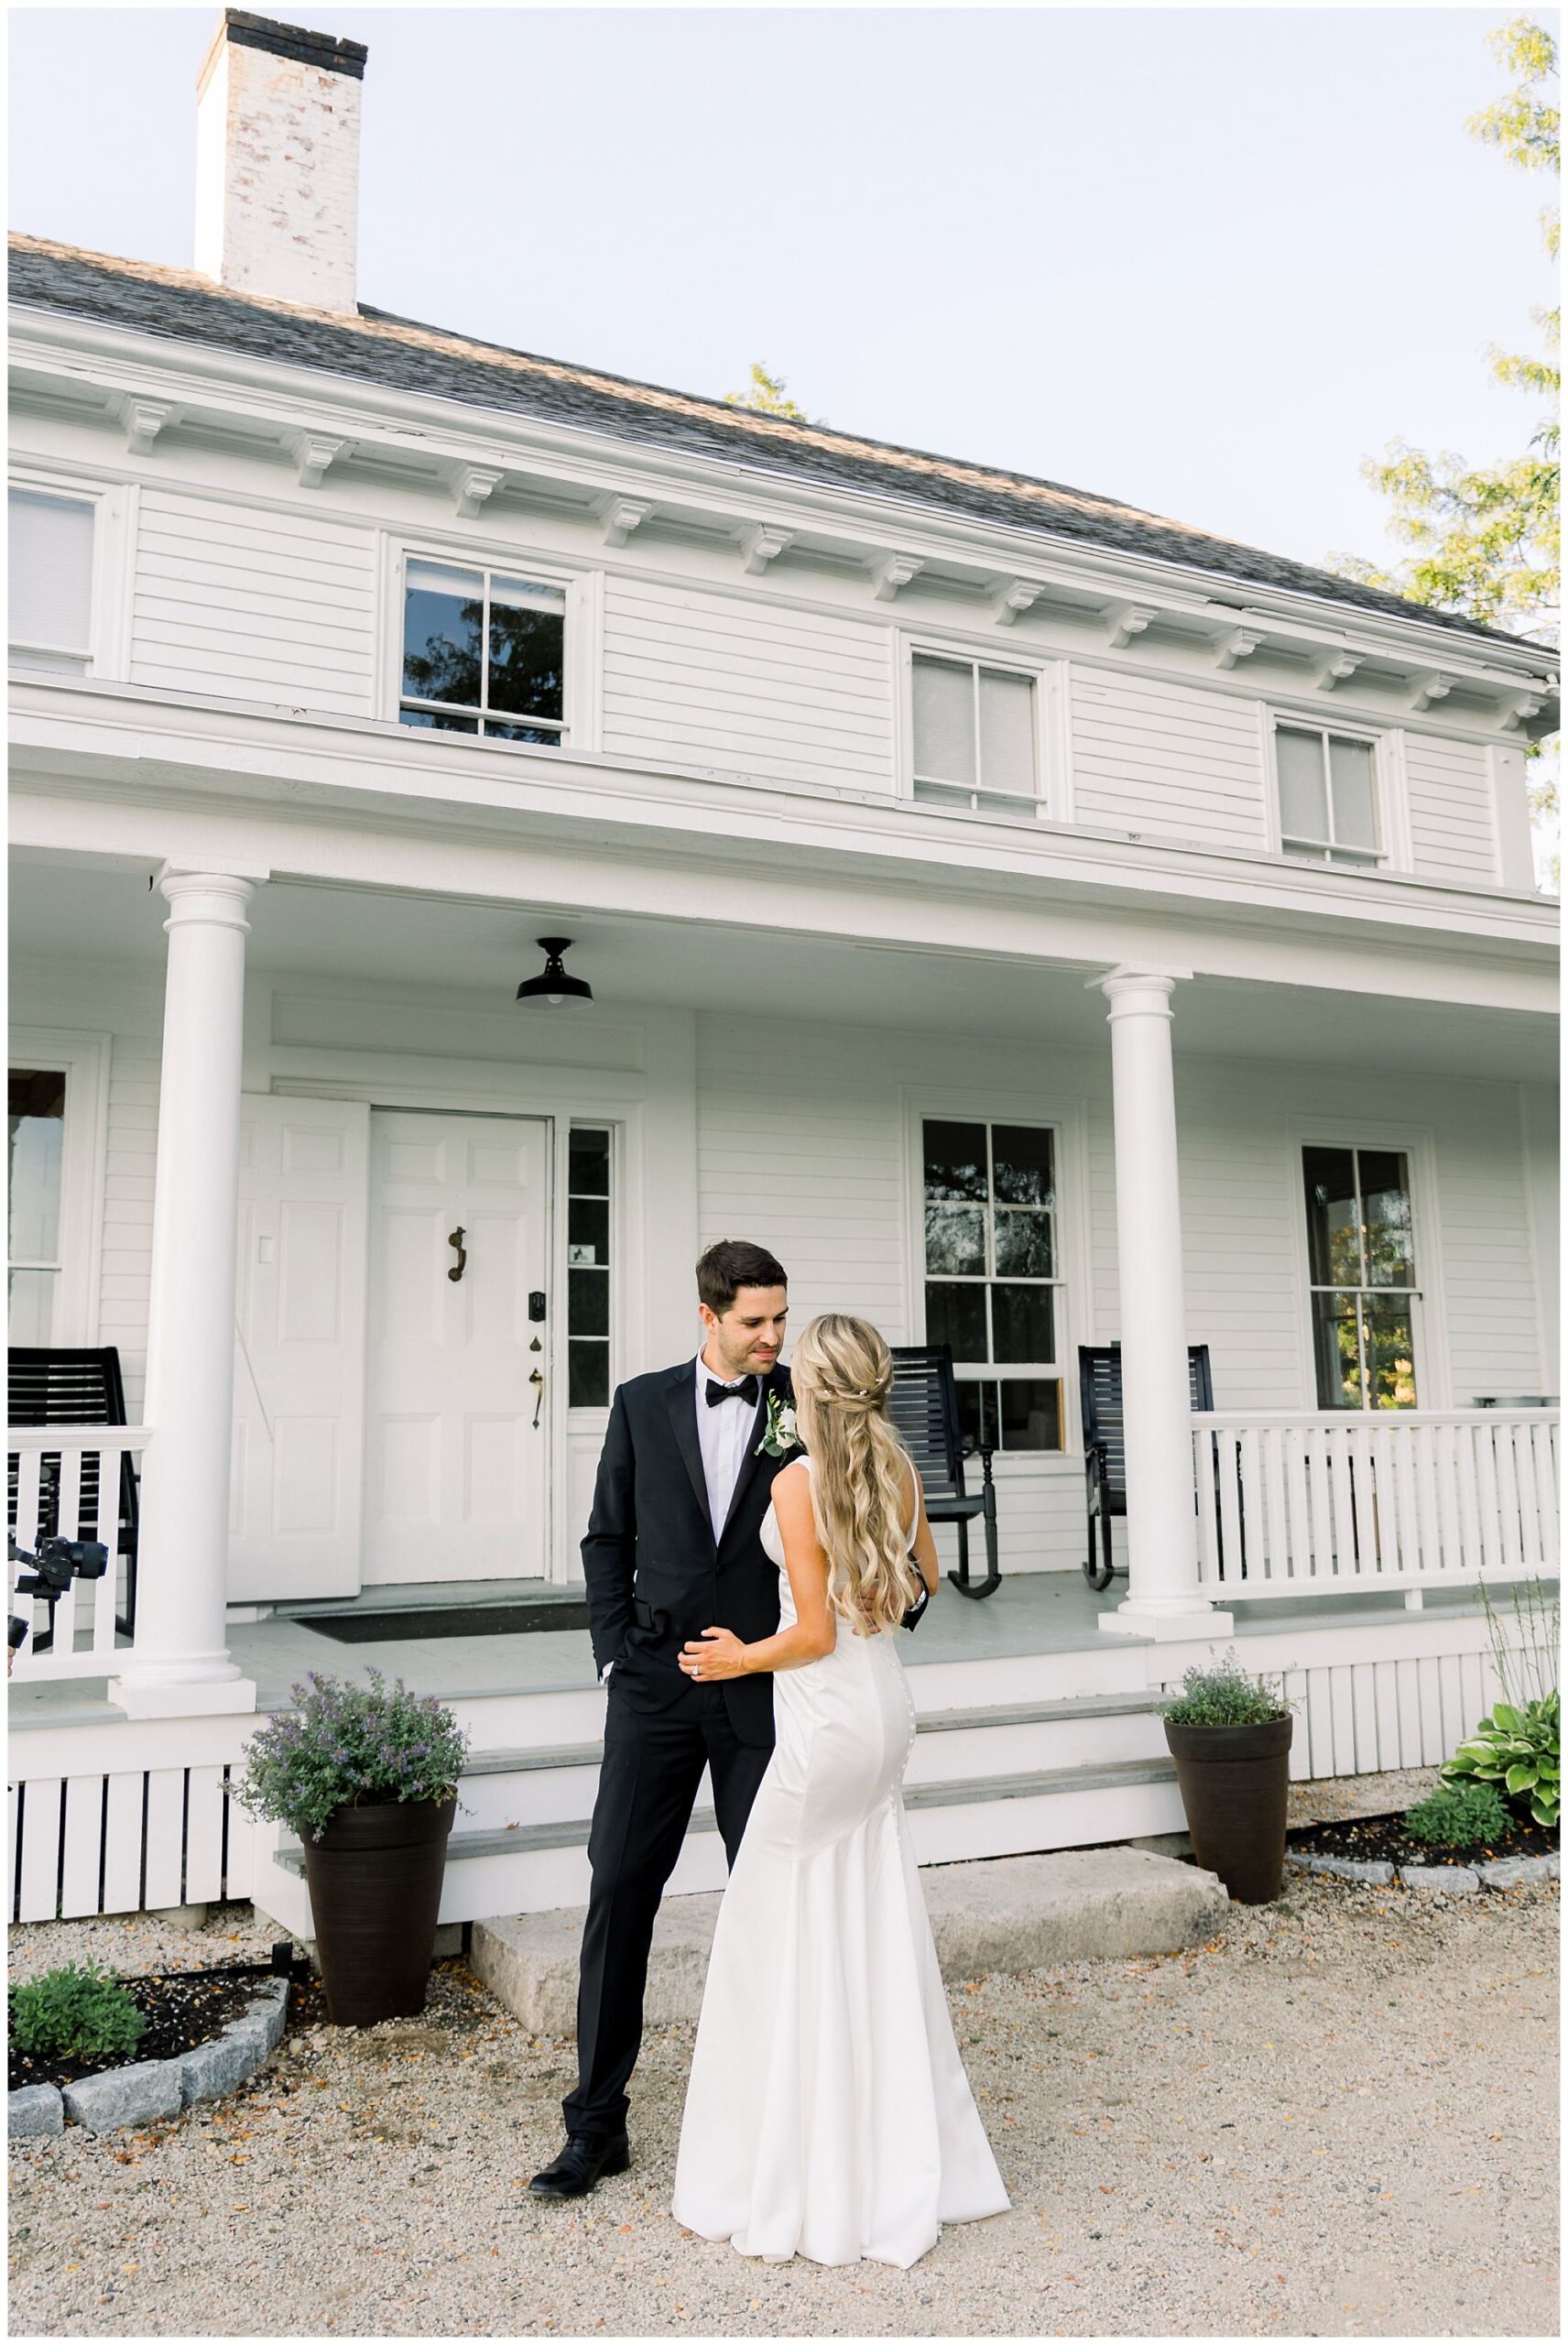 Portraits of bride & groom in front of the farmhouse at Scotland fields 